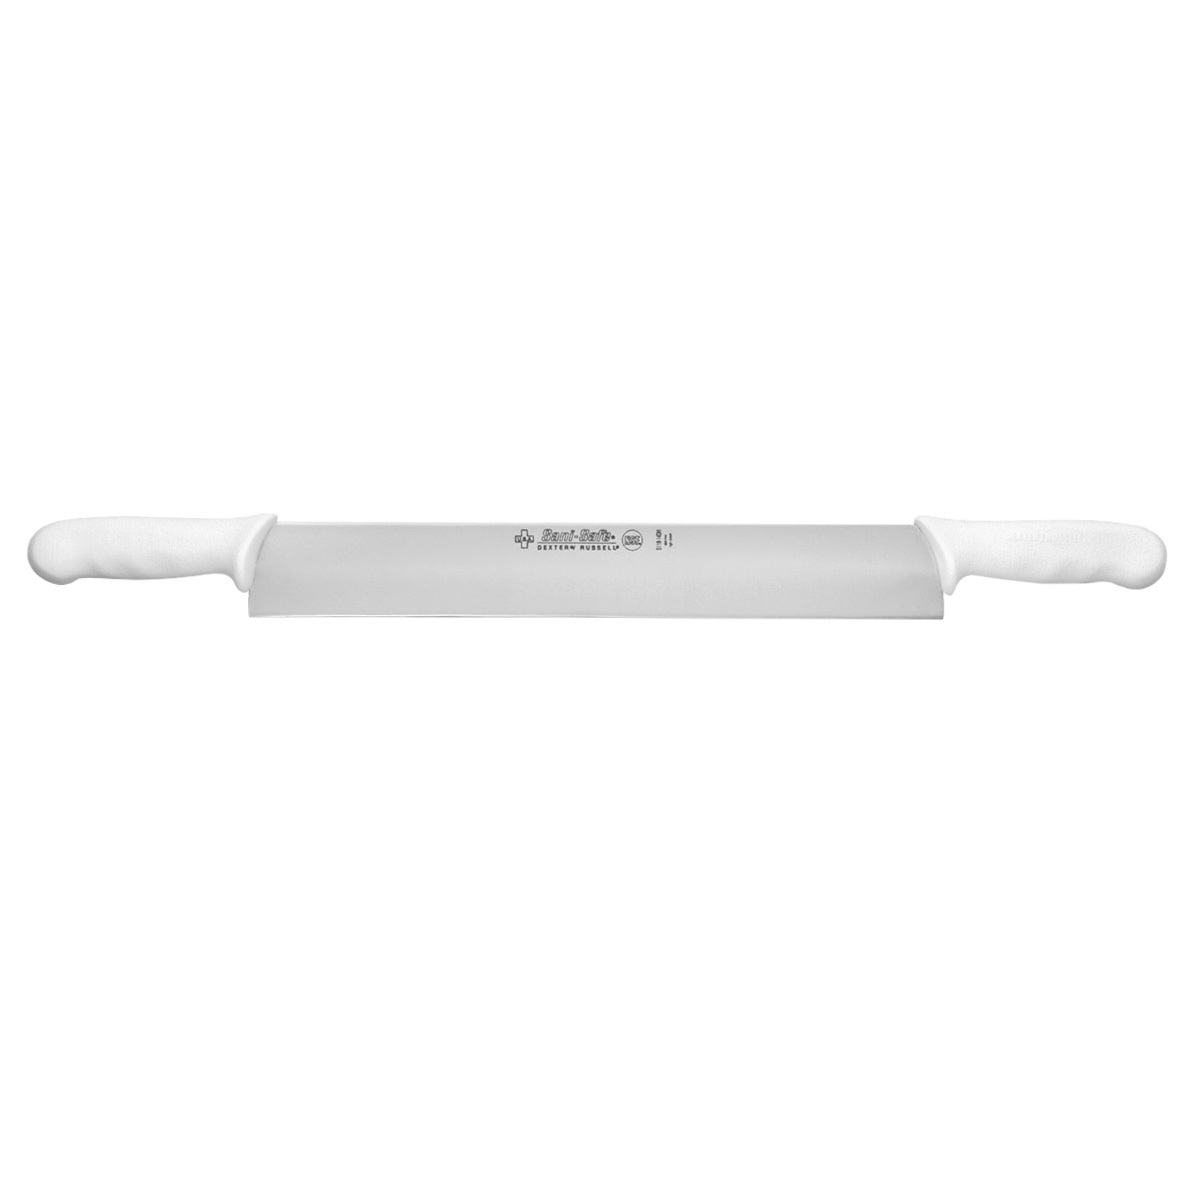 Dexter Cheese Knife, 35cm (14) - Double Handle - White